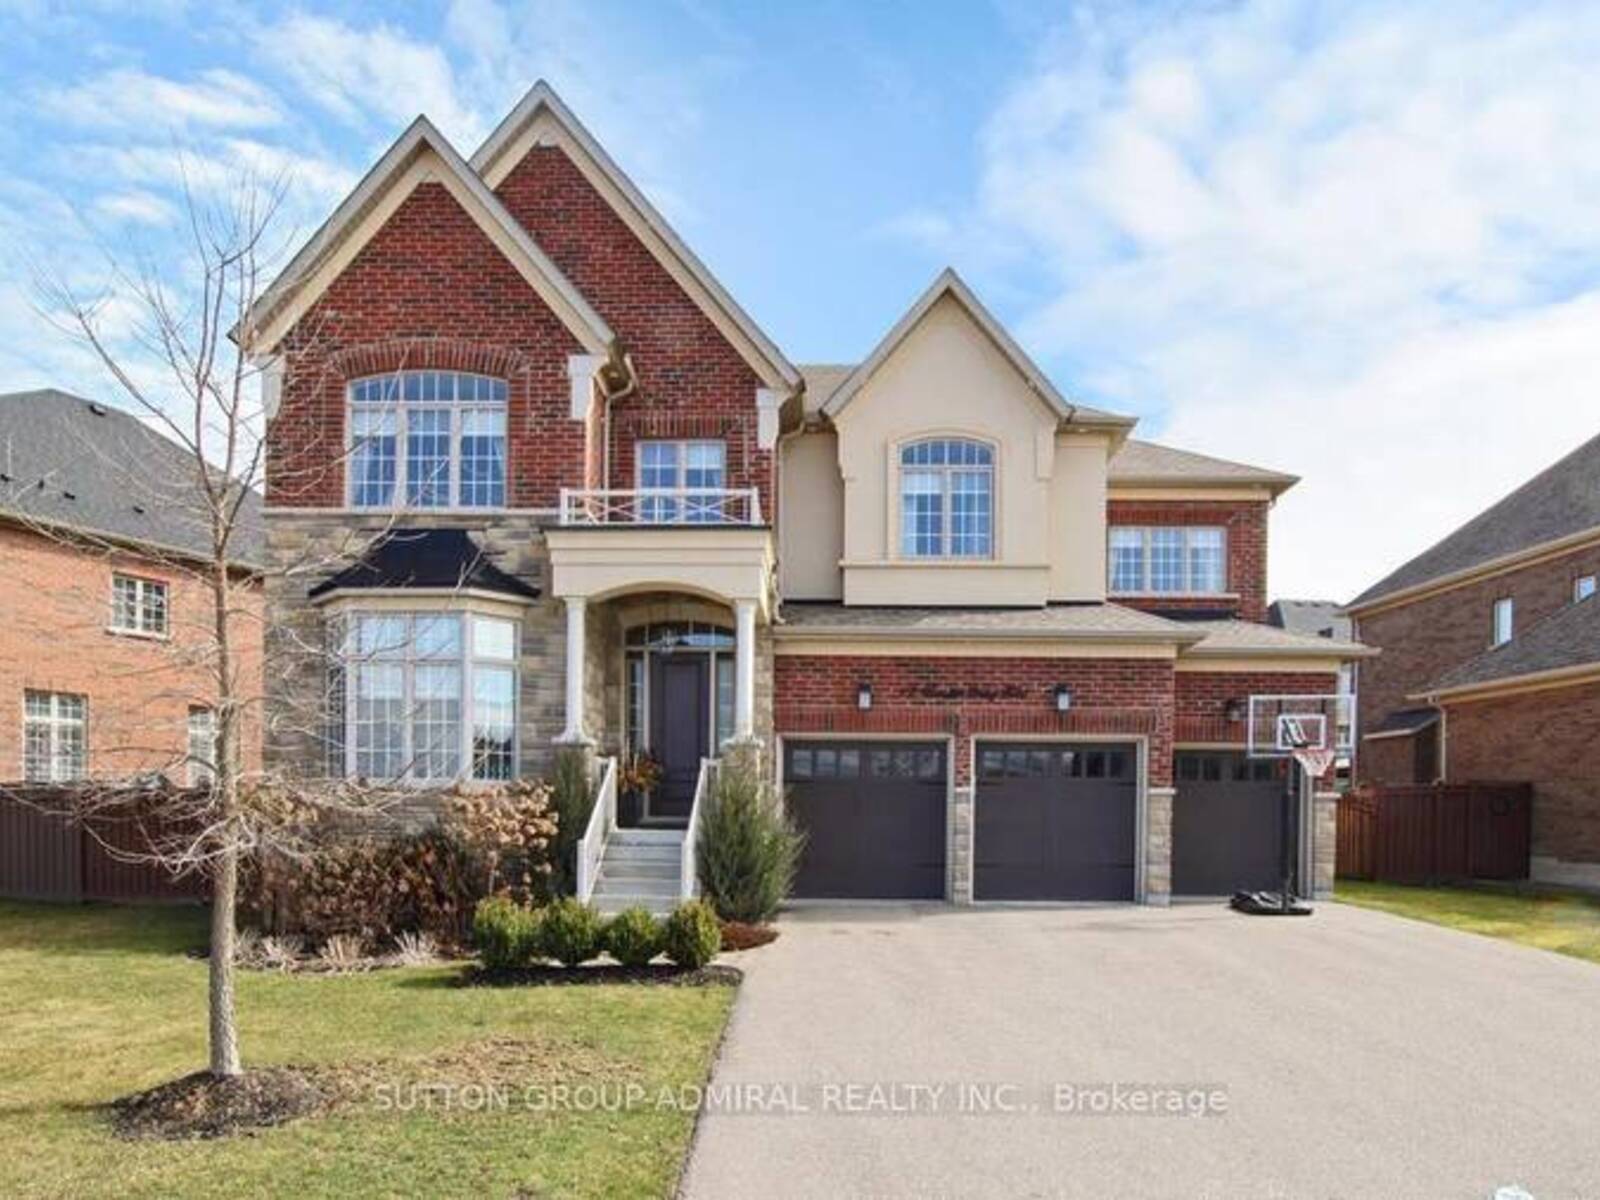 19 PARADISE VALLEY TR, King, Ontario L7B 0A5